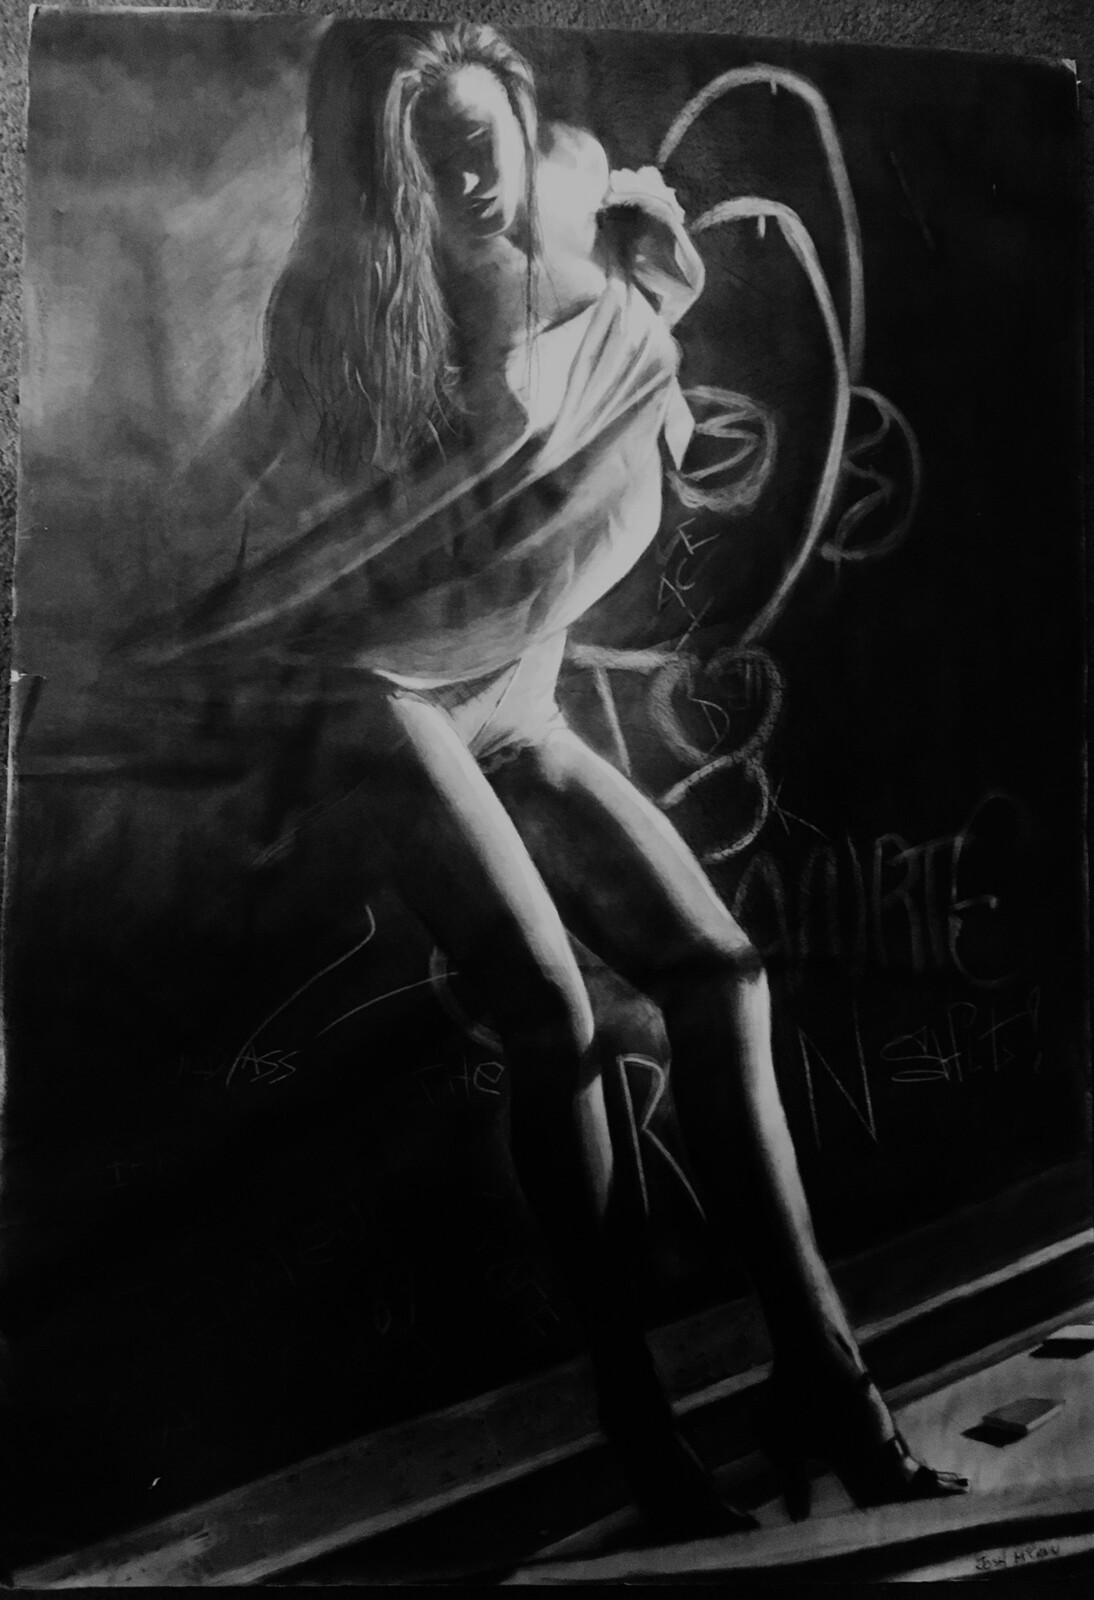 Original Charcoal done in 2004